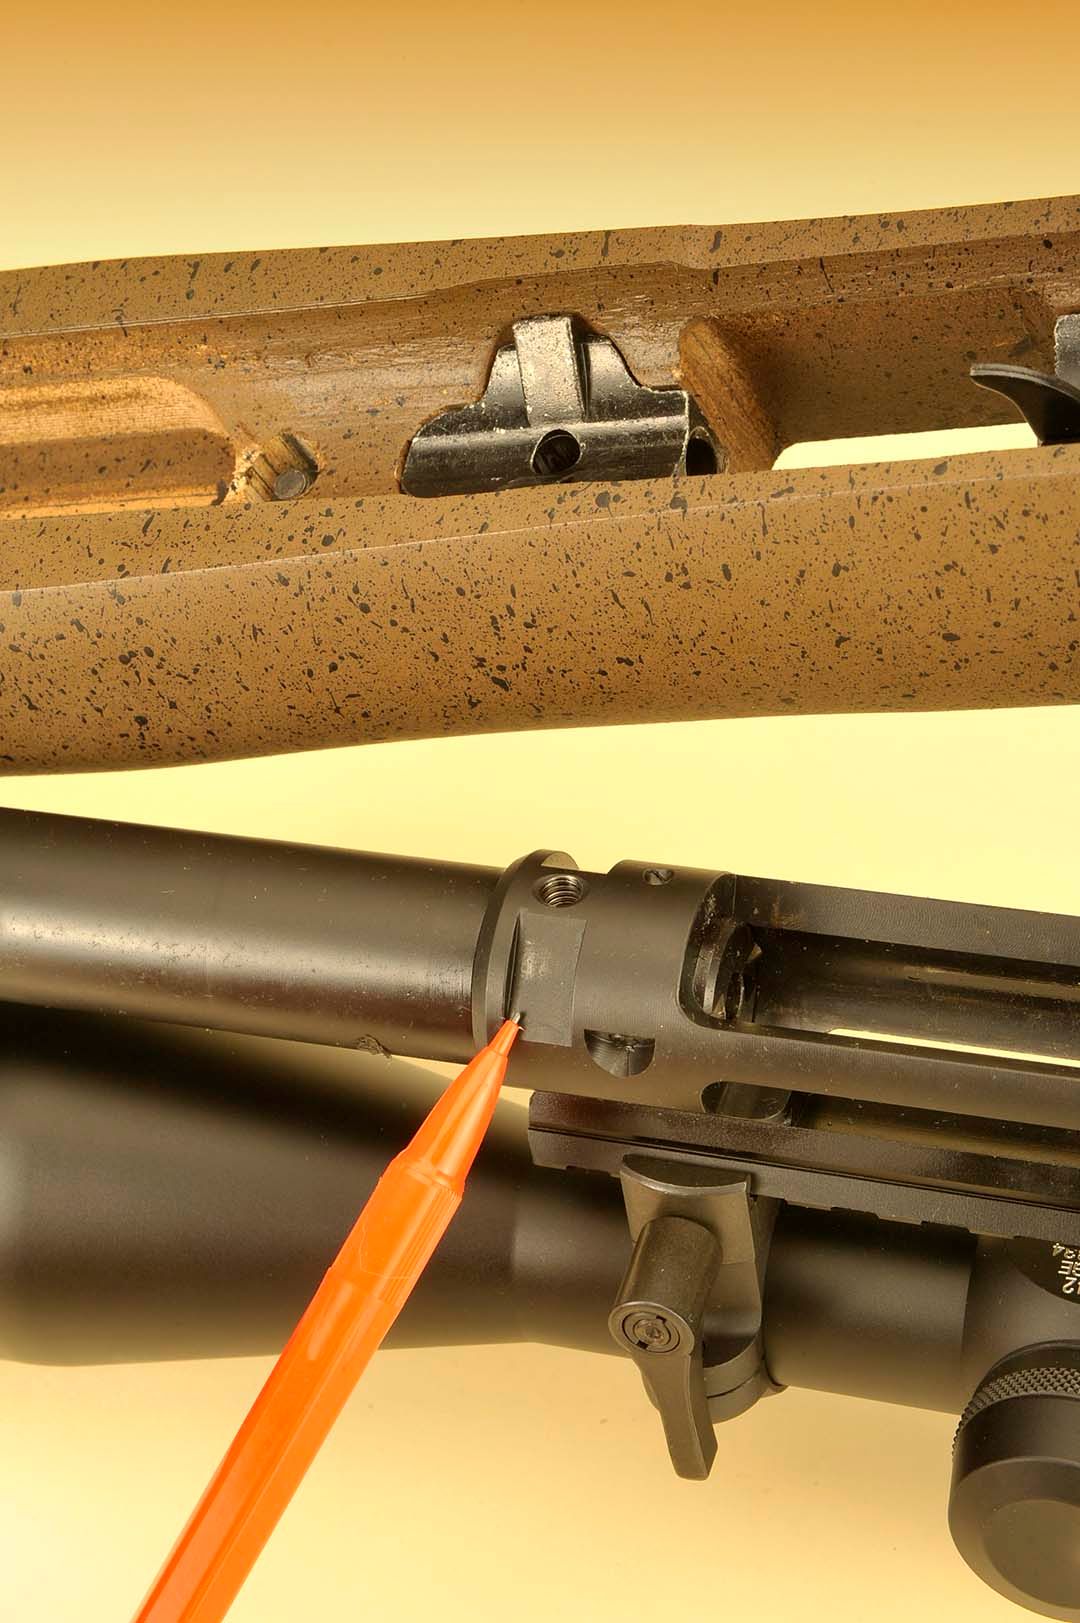 Here, you can see how Ruger’s Power Bedding integral bedding block is set up within the rifle. On top is the block with light-colored notches, while the bottom shows how they fit within the confines of like notches on the receiver. Everything fits without any fuss when taking the rifle apart for maintenance and placing it back again.